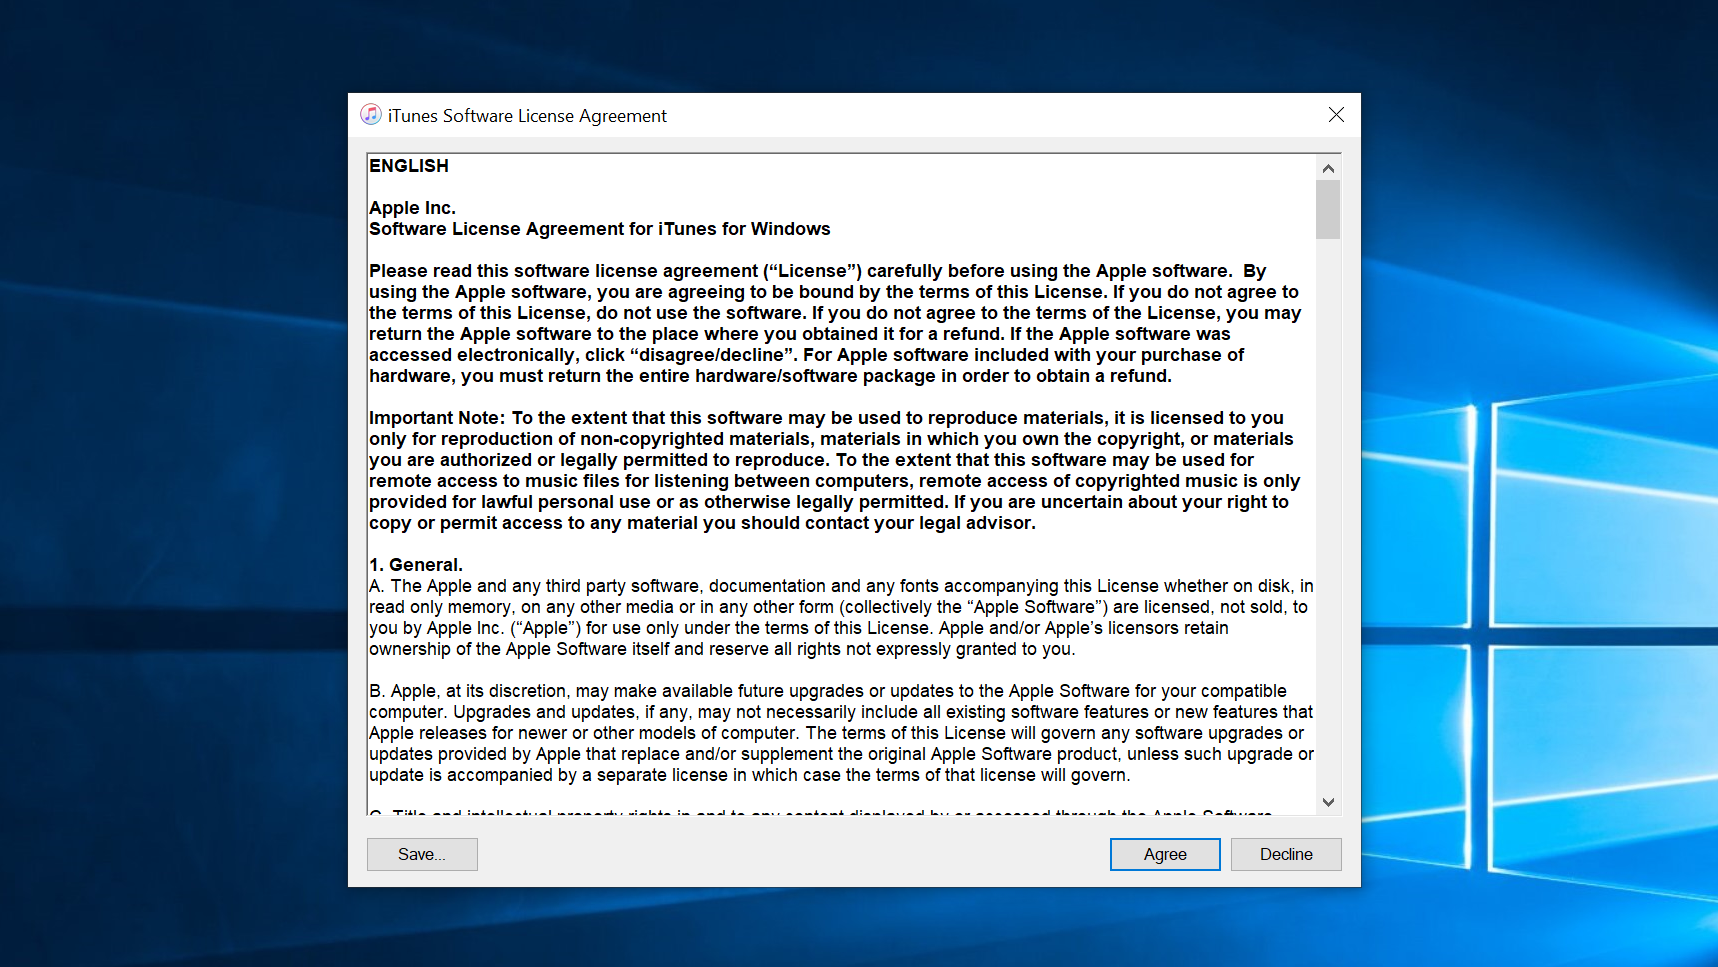 Agree to the iTunes Software License Agreement.